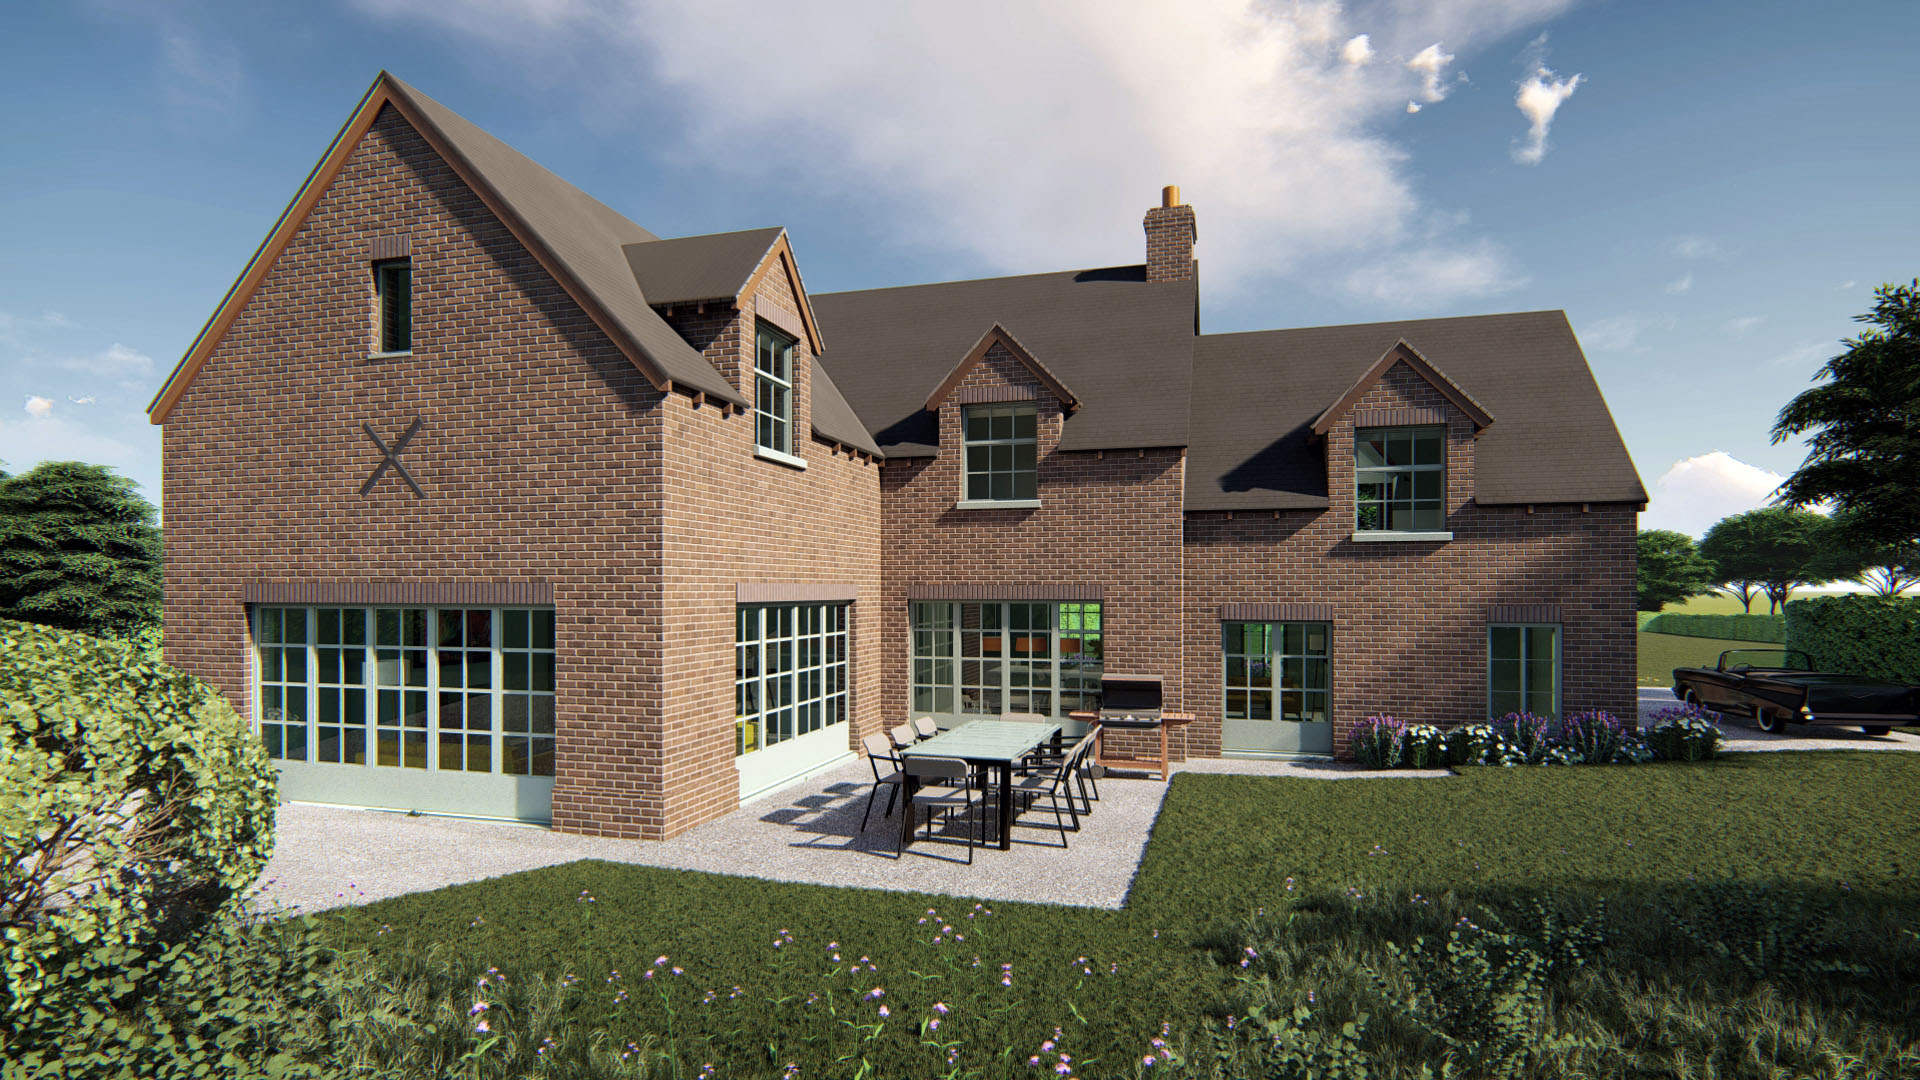 visual of side of new build with farm style red bricks and attractive garden area